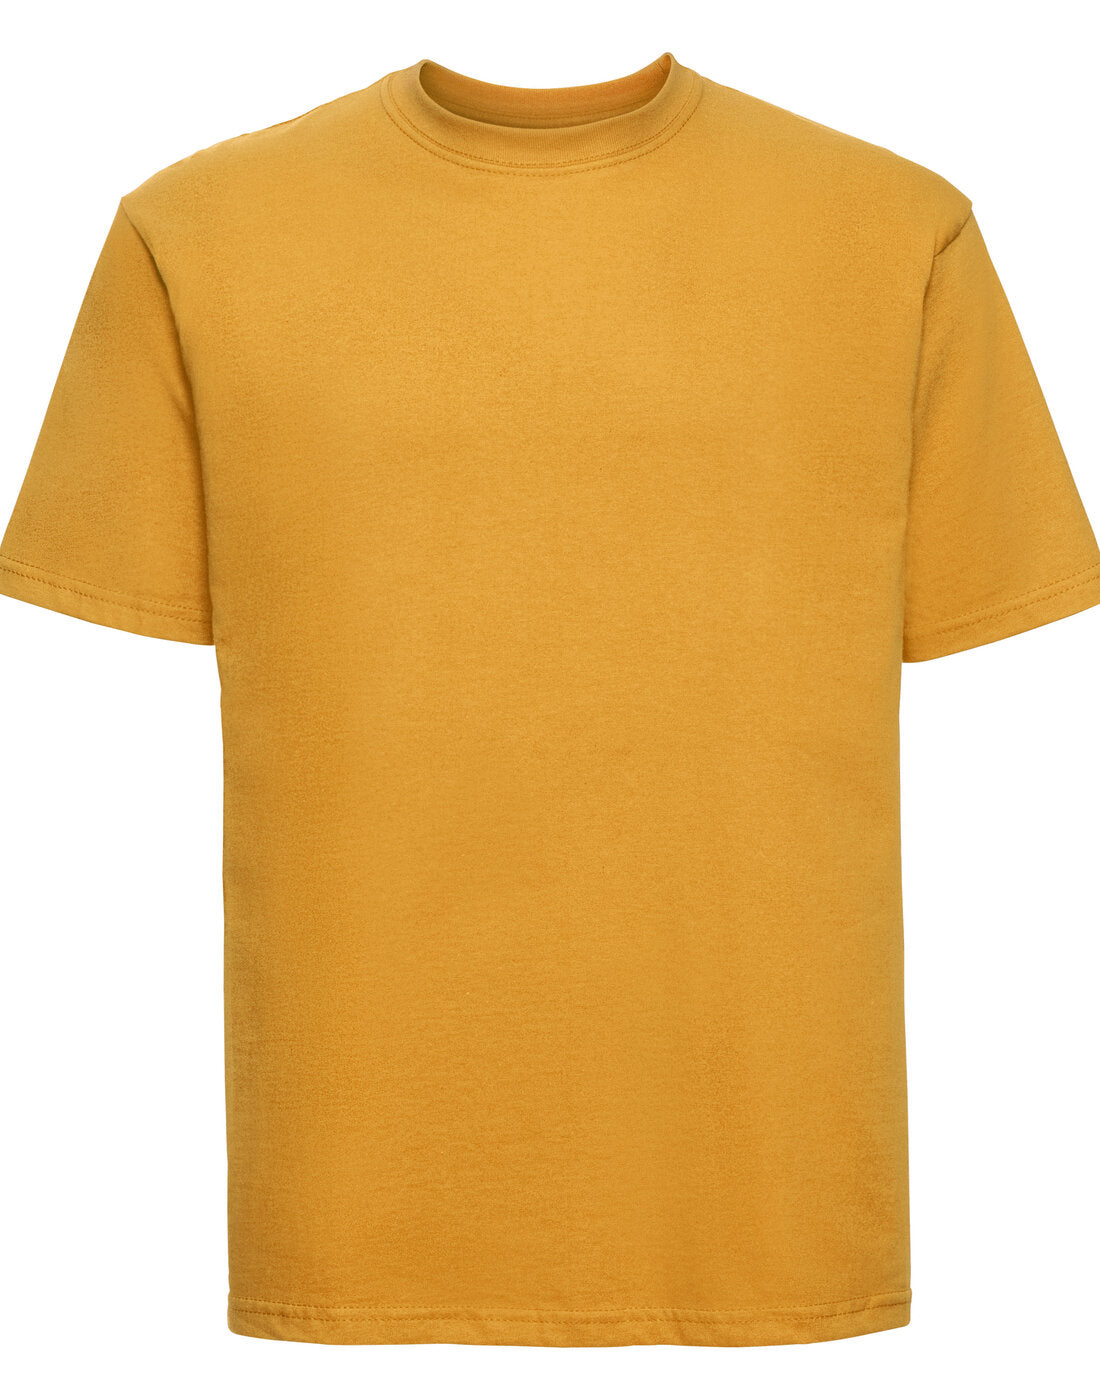 Russell Classic Unisex T-Shirt - Pure Gold